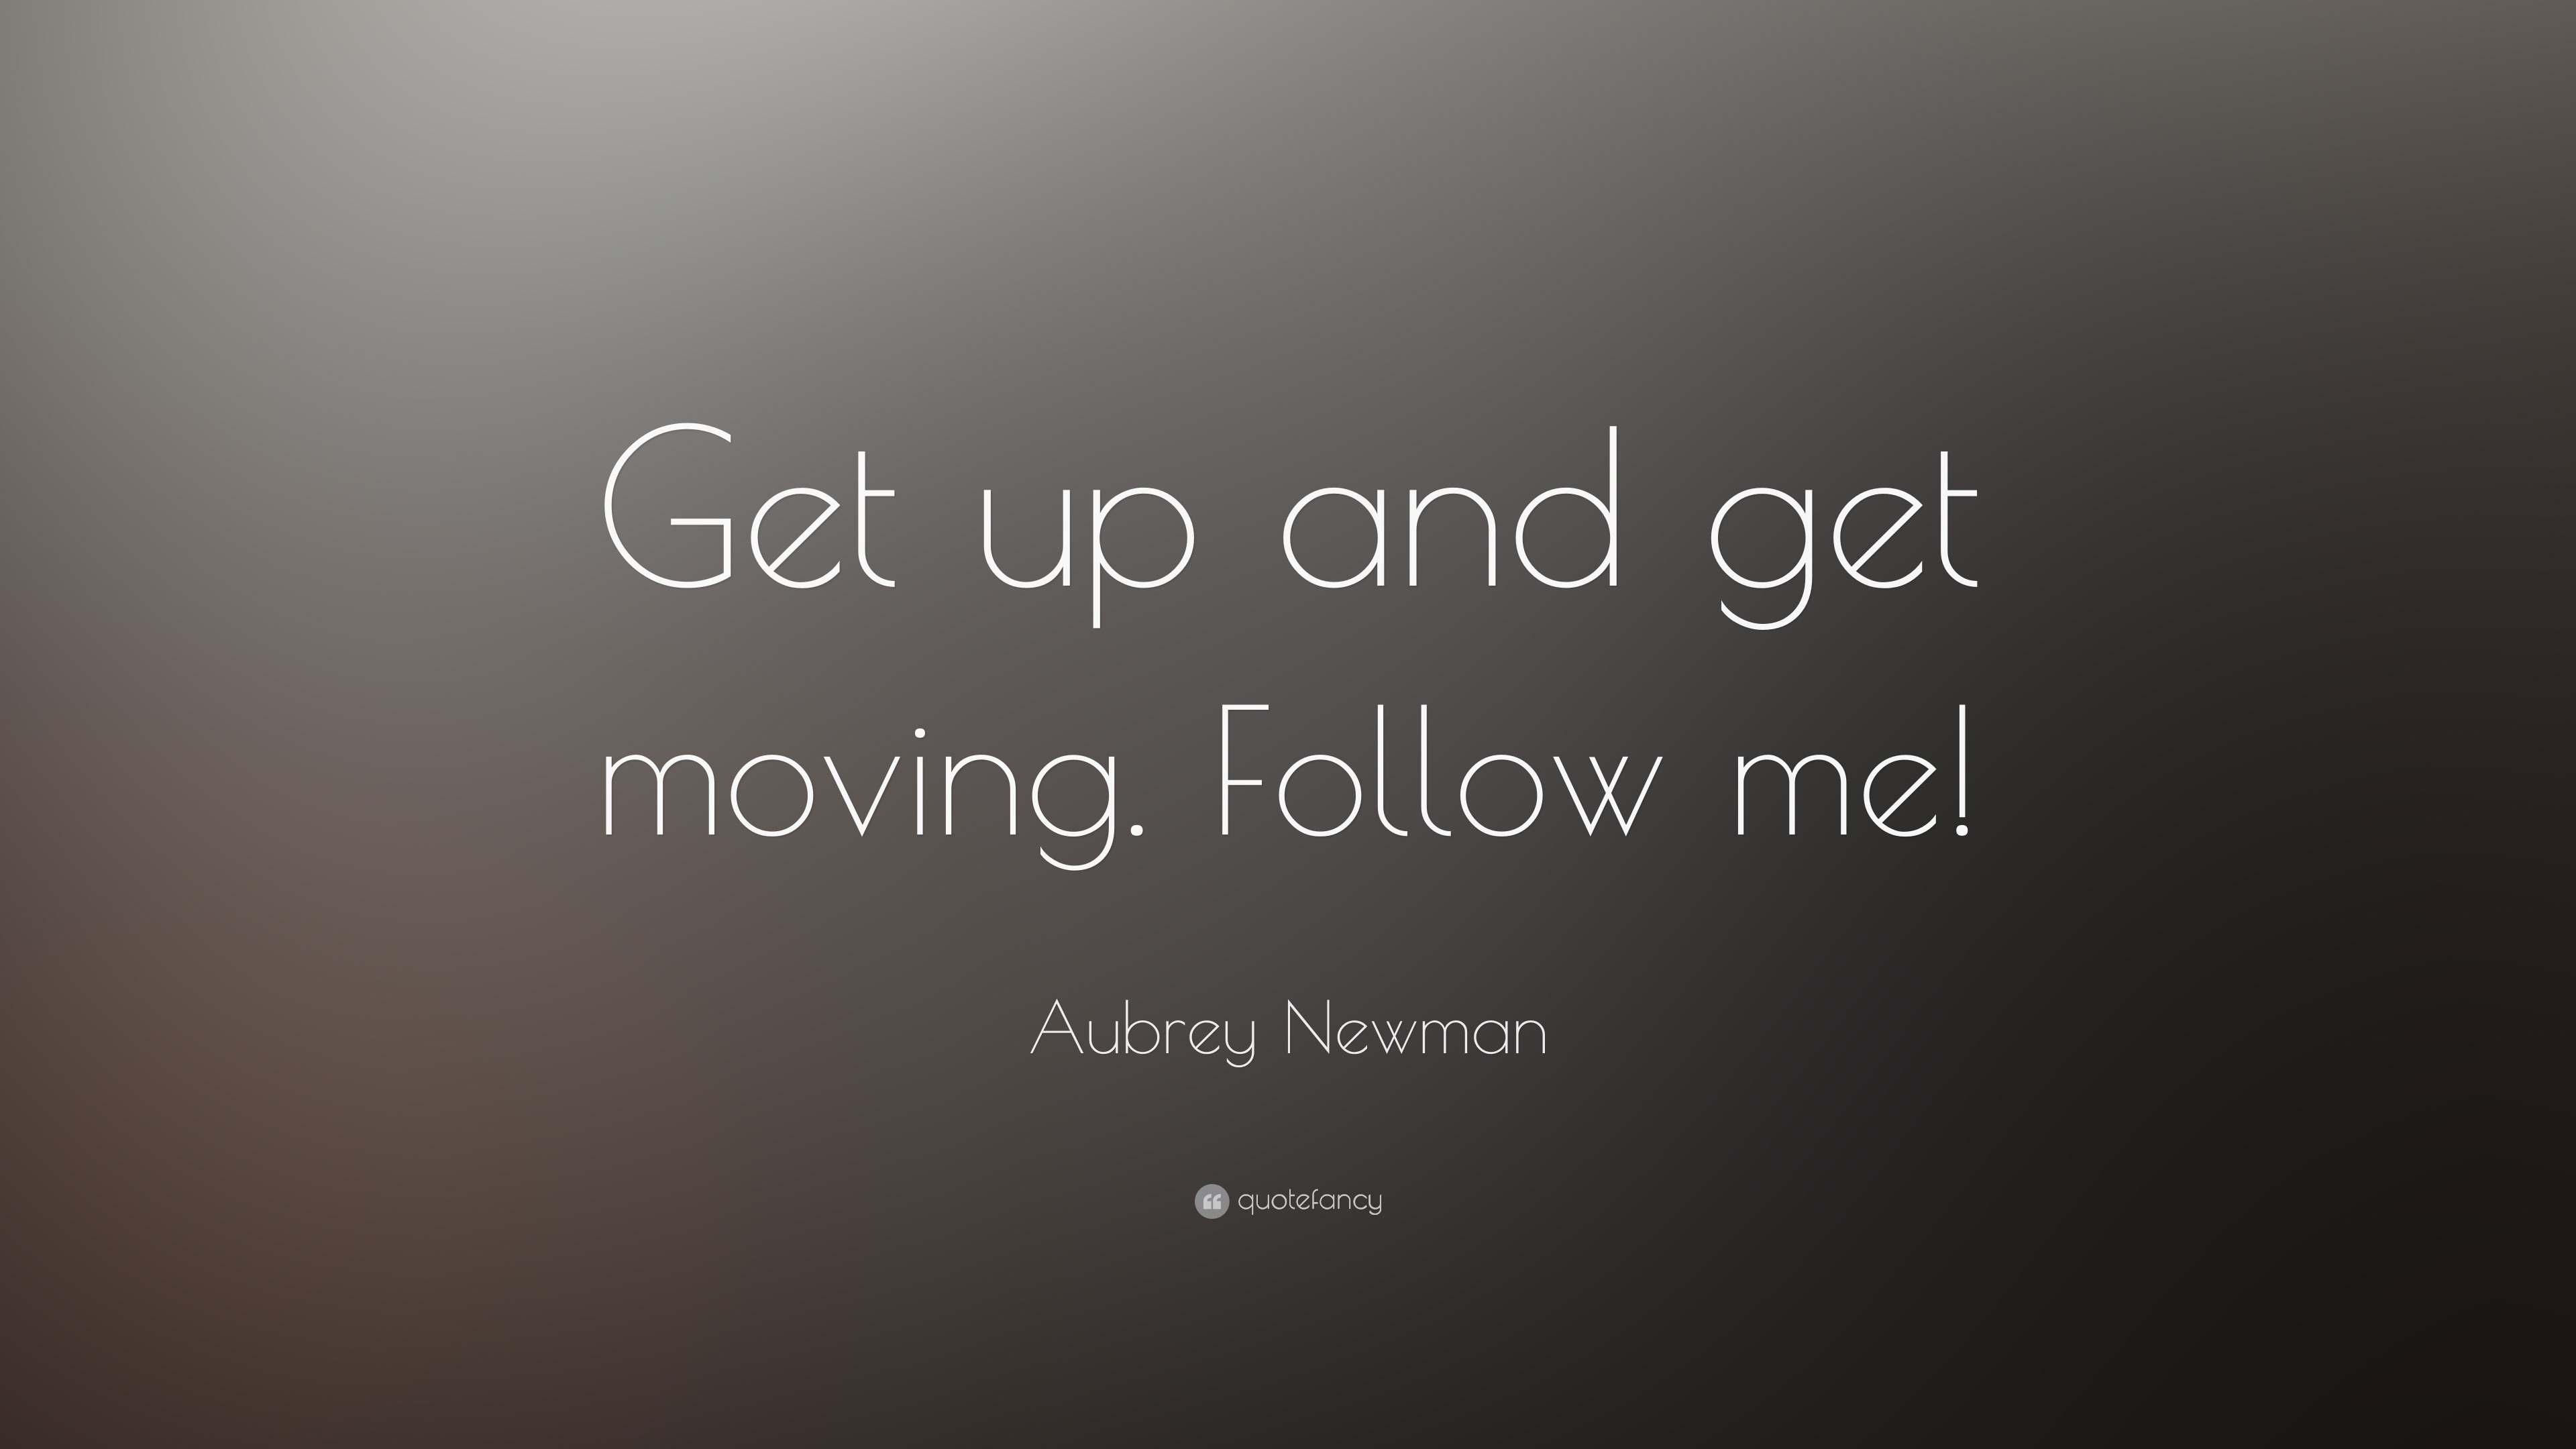 Aubrey Newman Quote: “Get Up And Get Moving. Follow Me!”